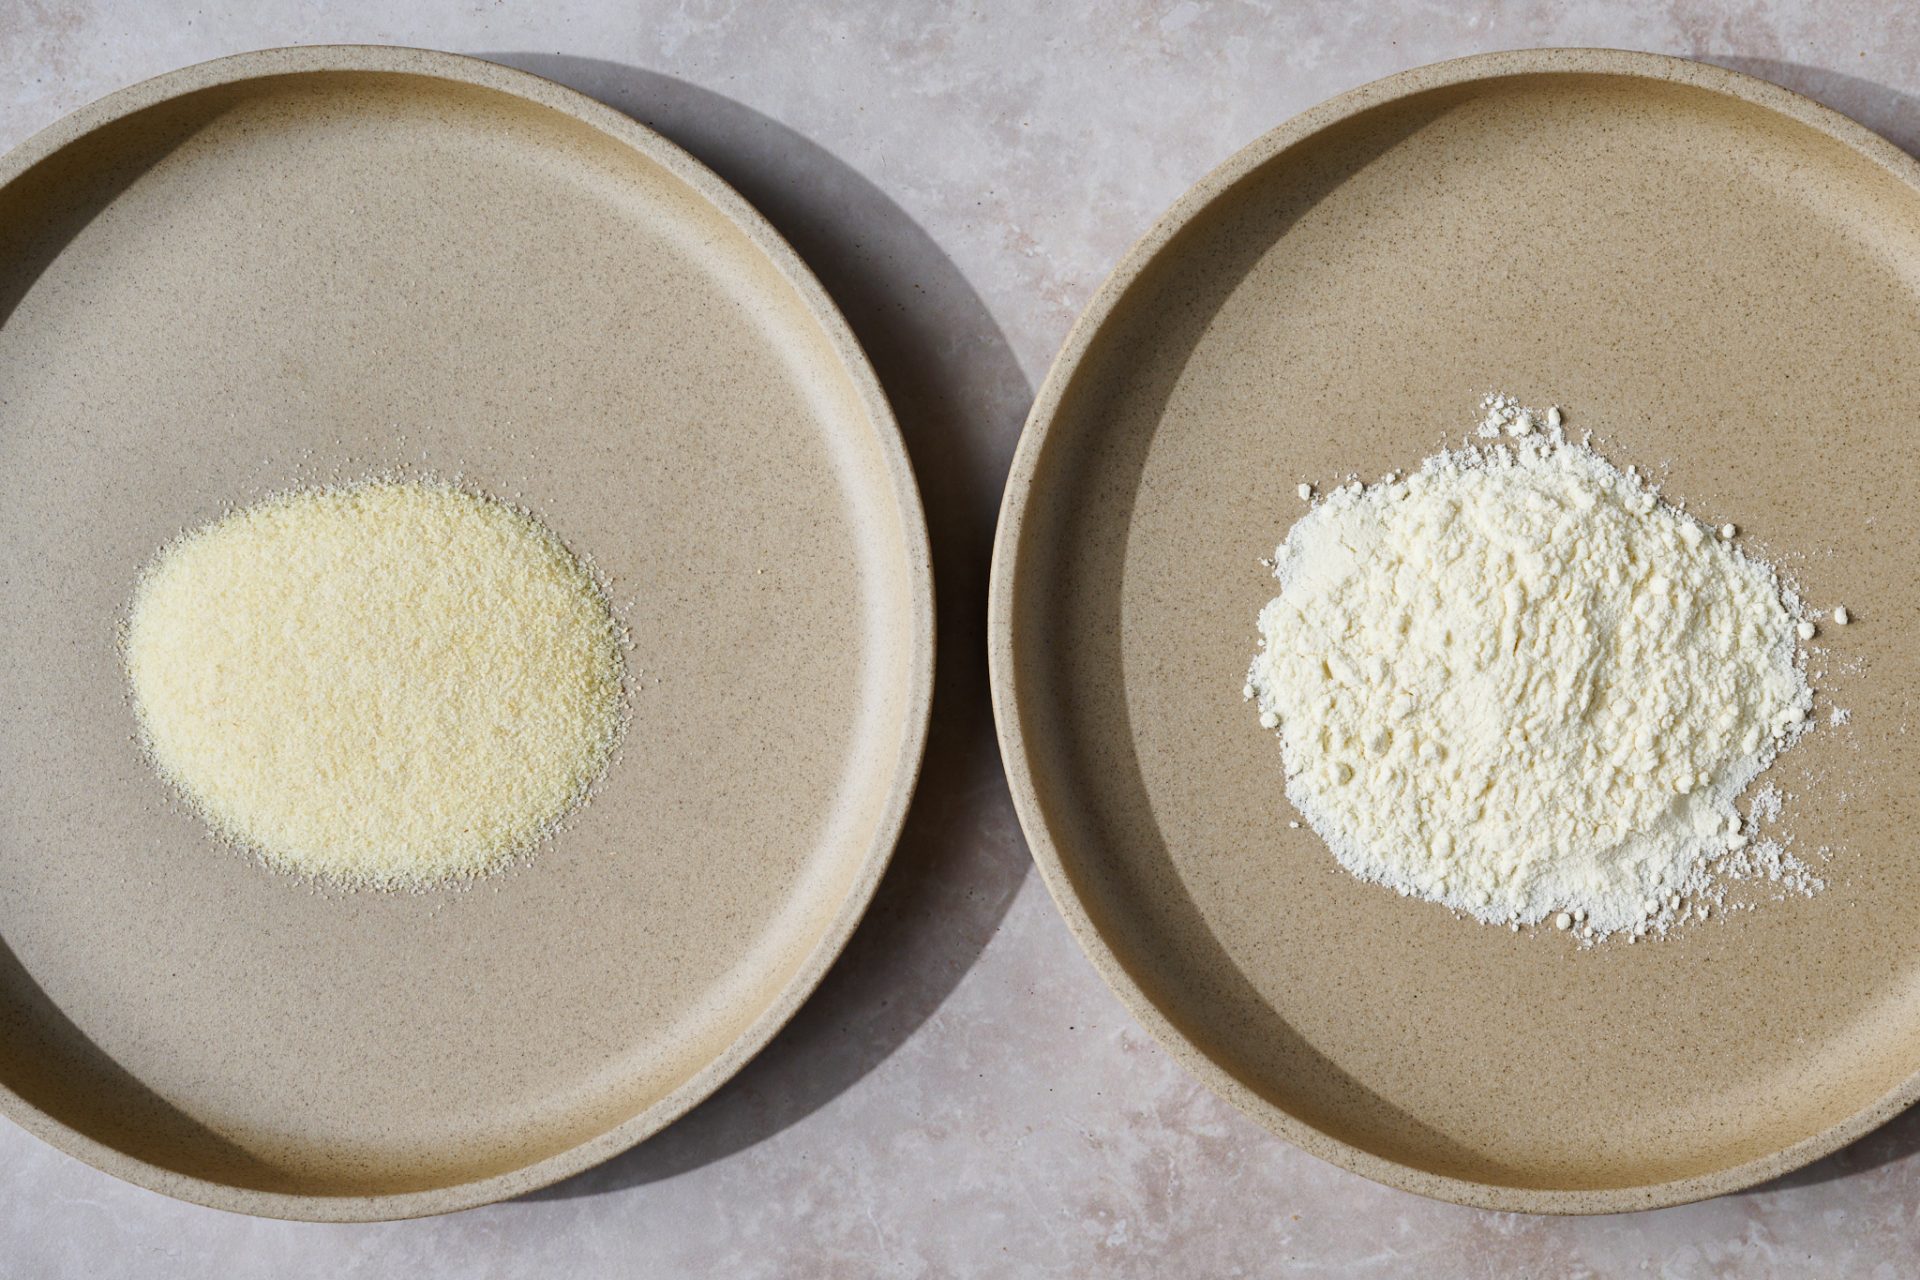 The difference between durum and semolina